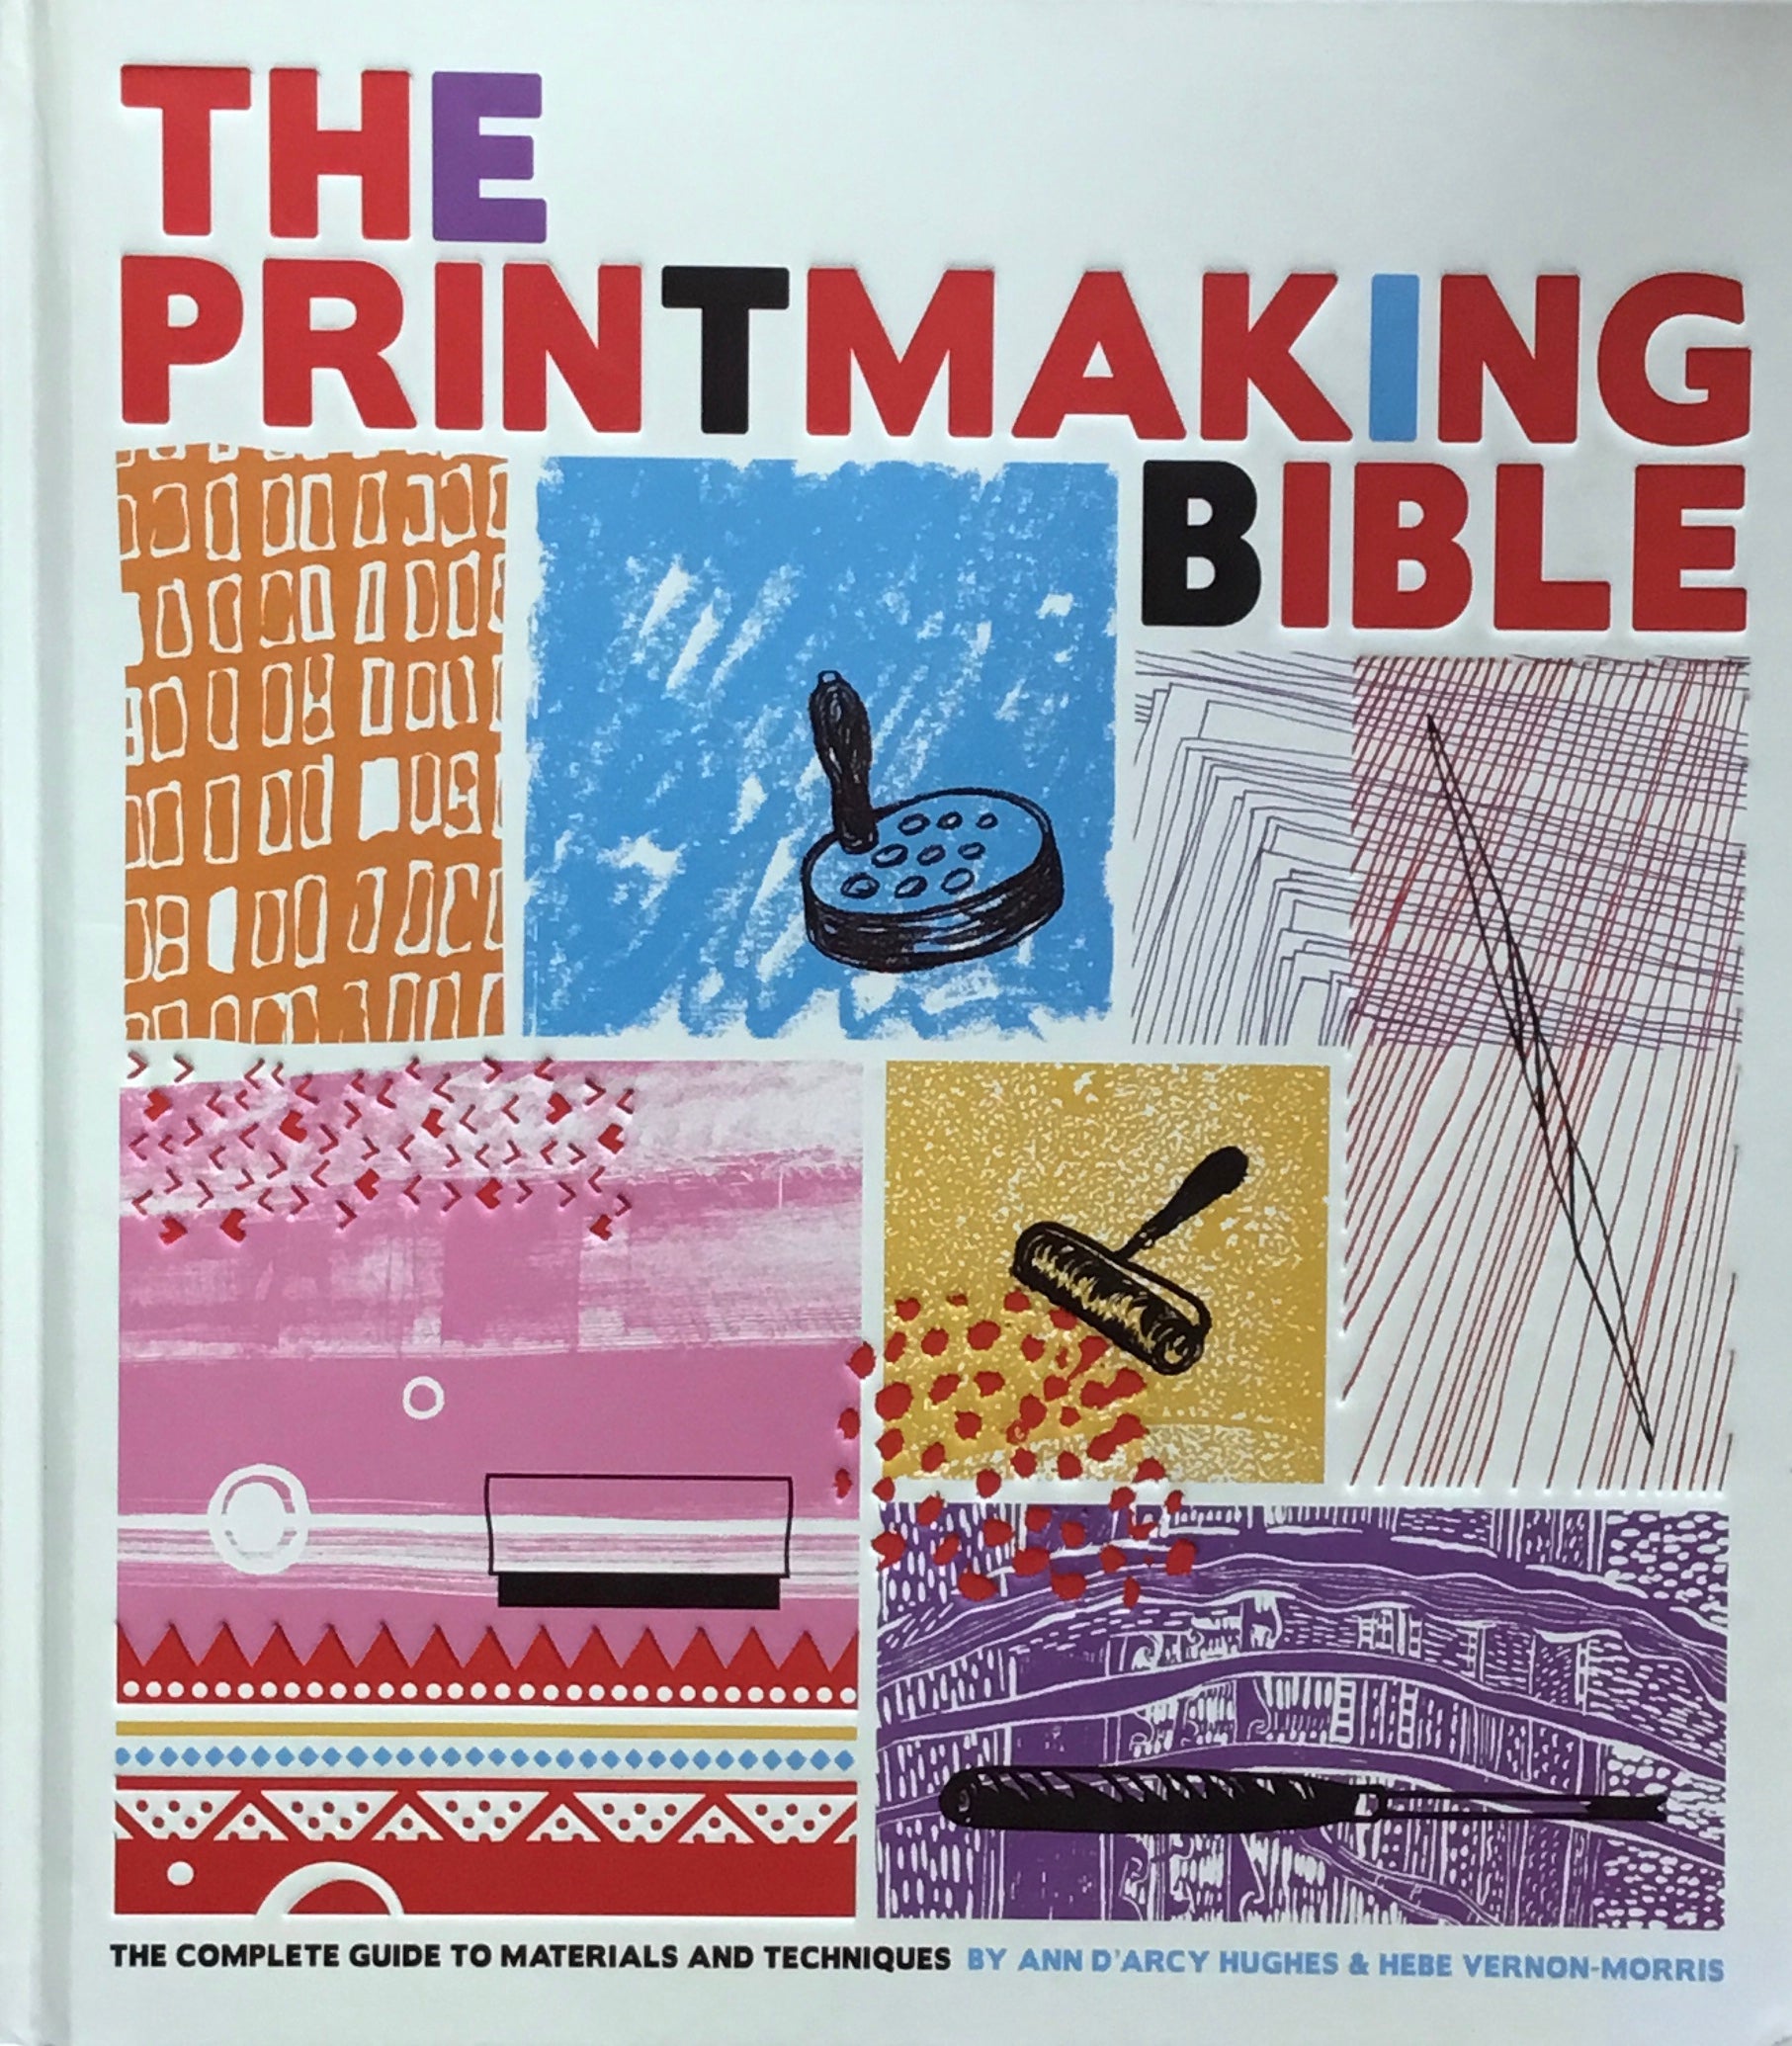 The Printmaking Bible: The Complete Guide to Materials and Techniques　by Ann d'Arcy Hughes, Hebe Vernon-Morris